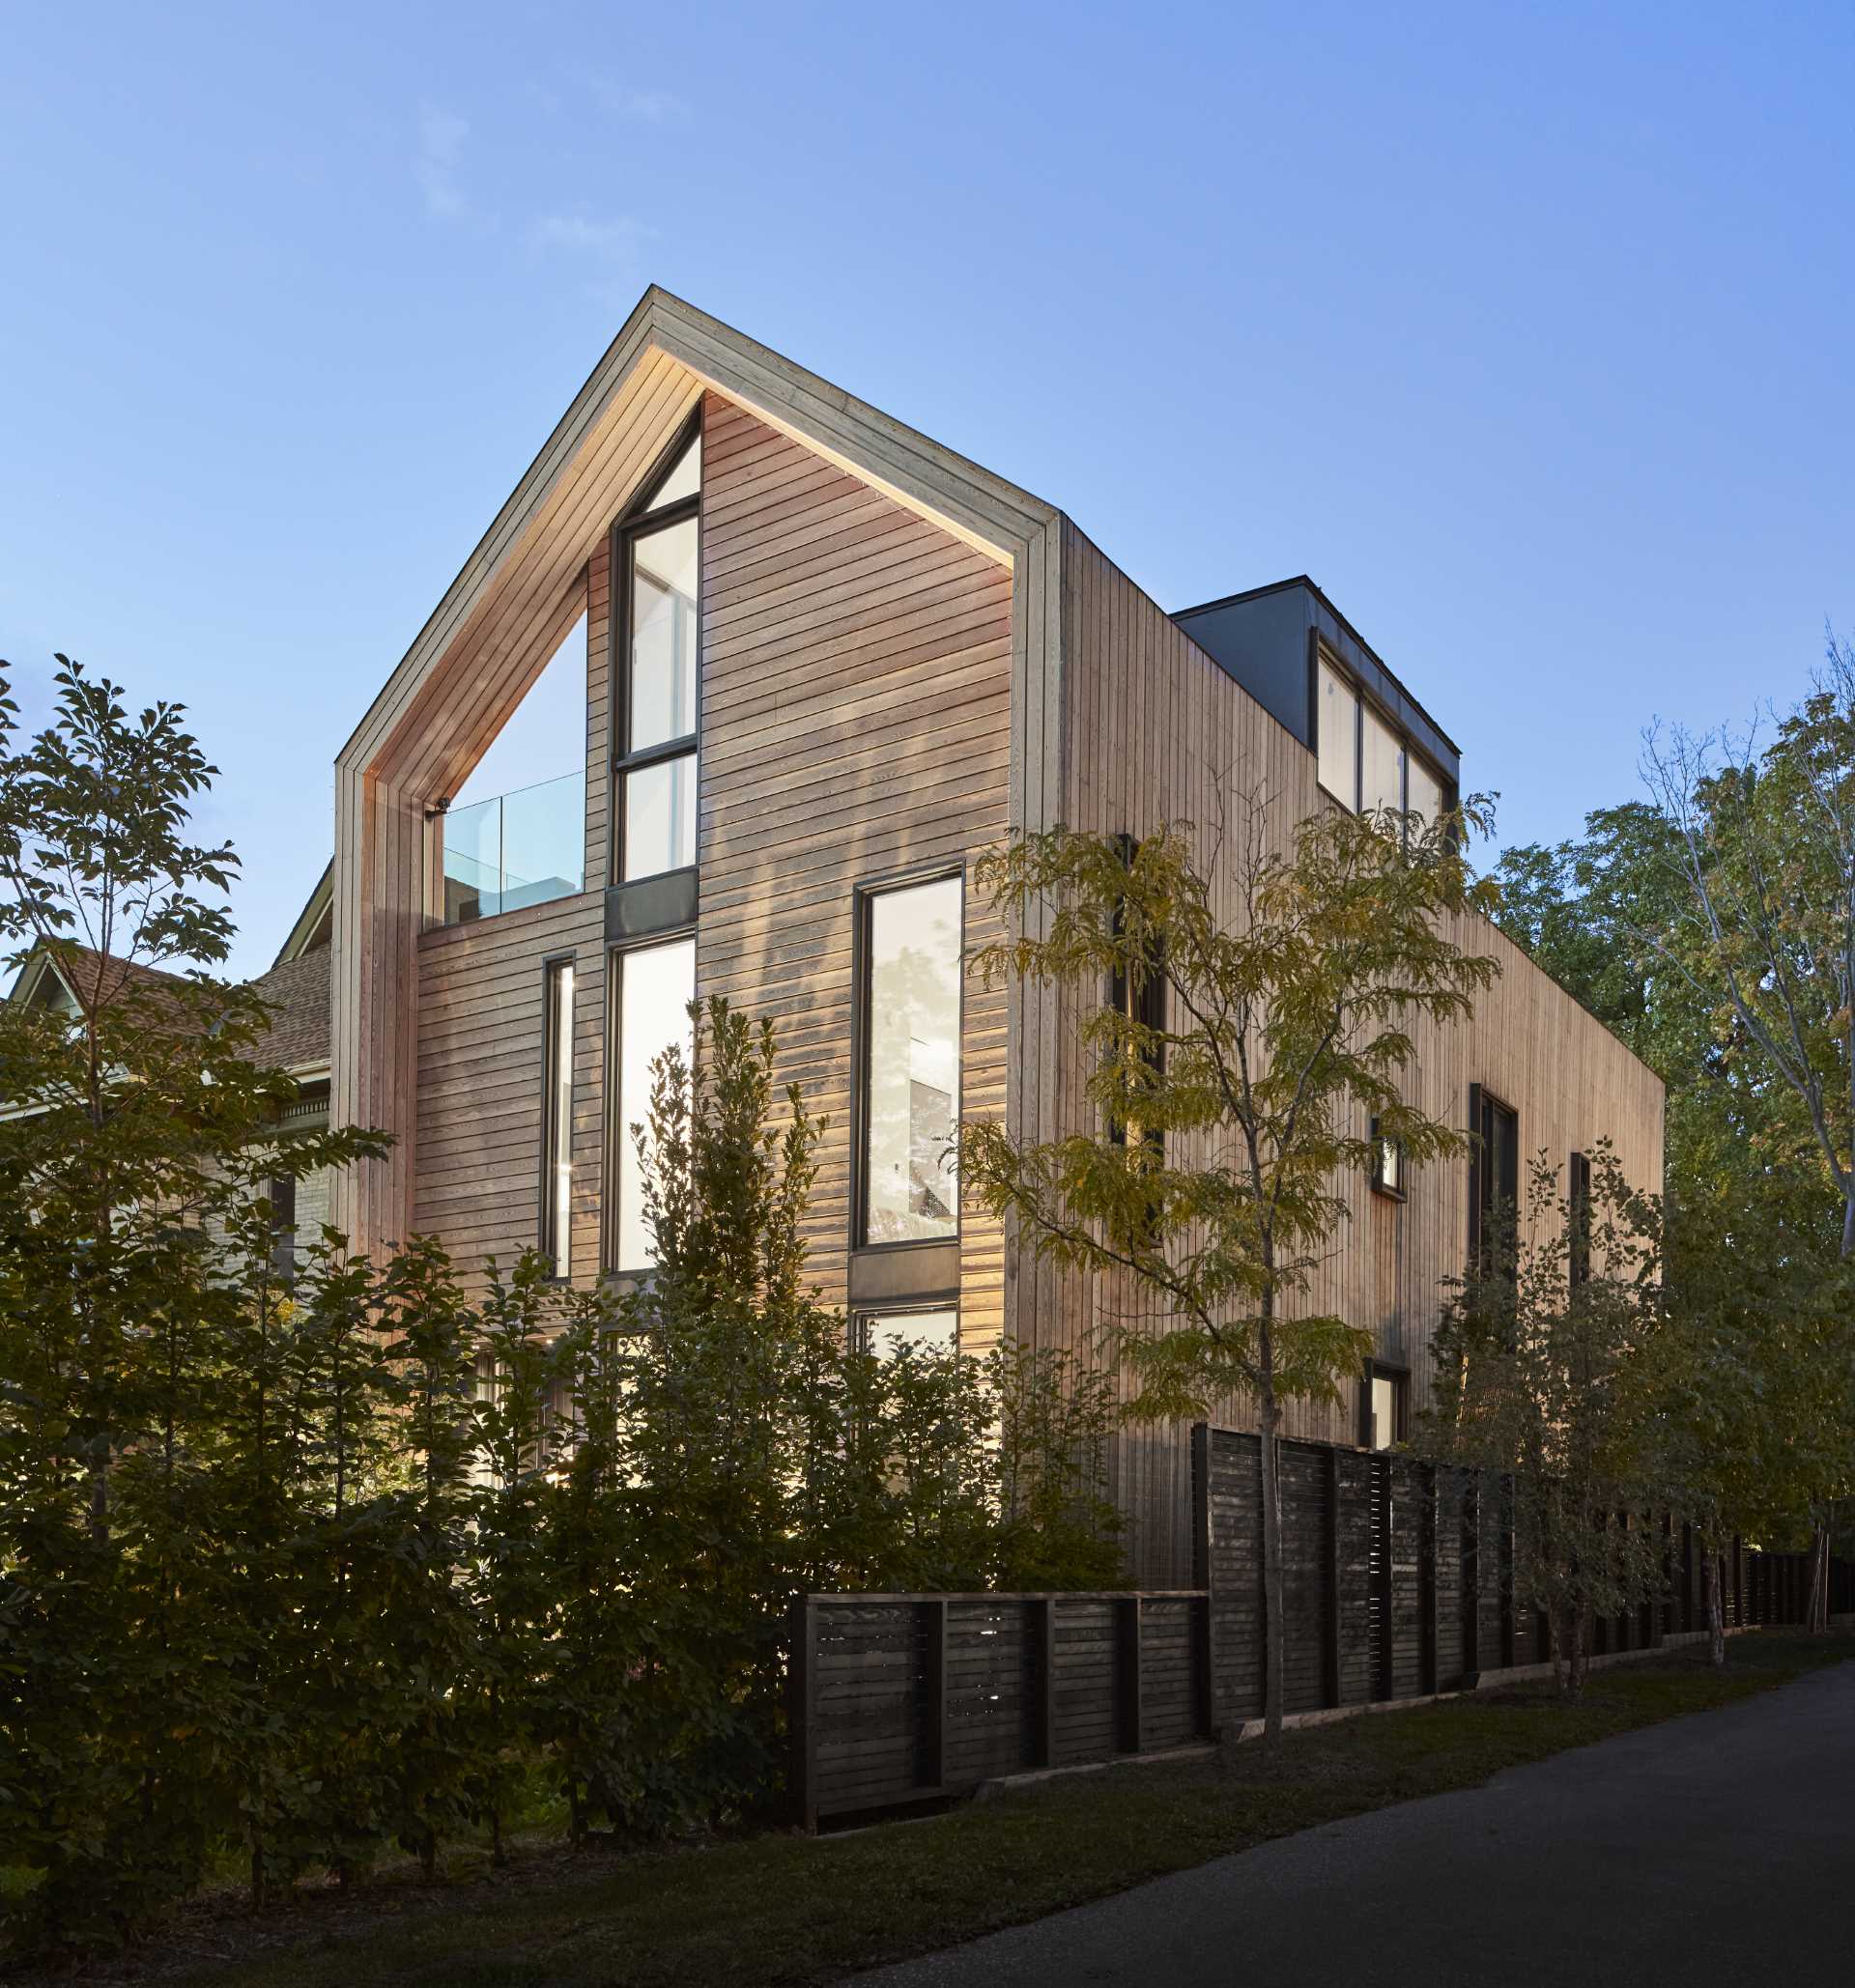 This home is clad in pre-treated kiln-dried wood siding to exude warmth and texture, while a prefinished standing seam metal roof adds a contemporary element. 